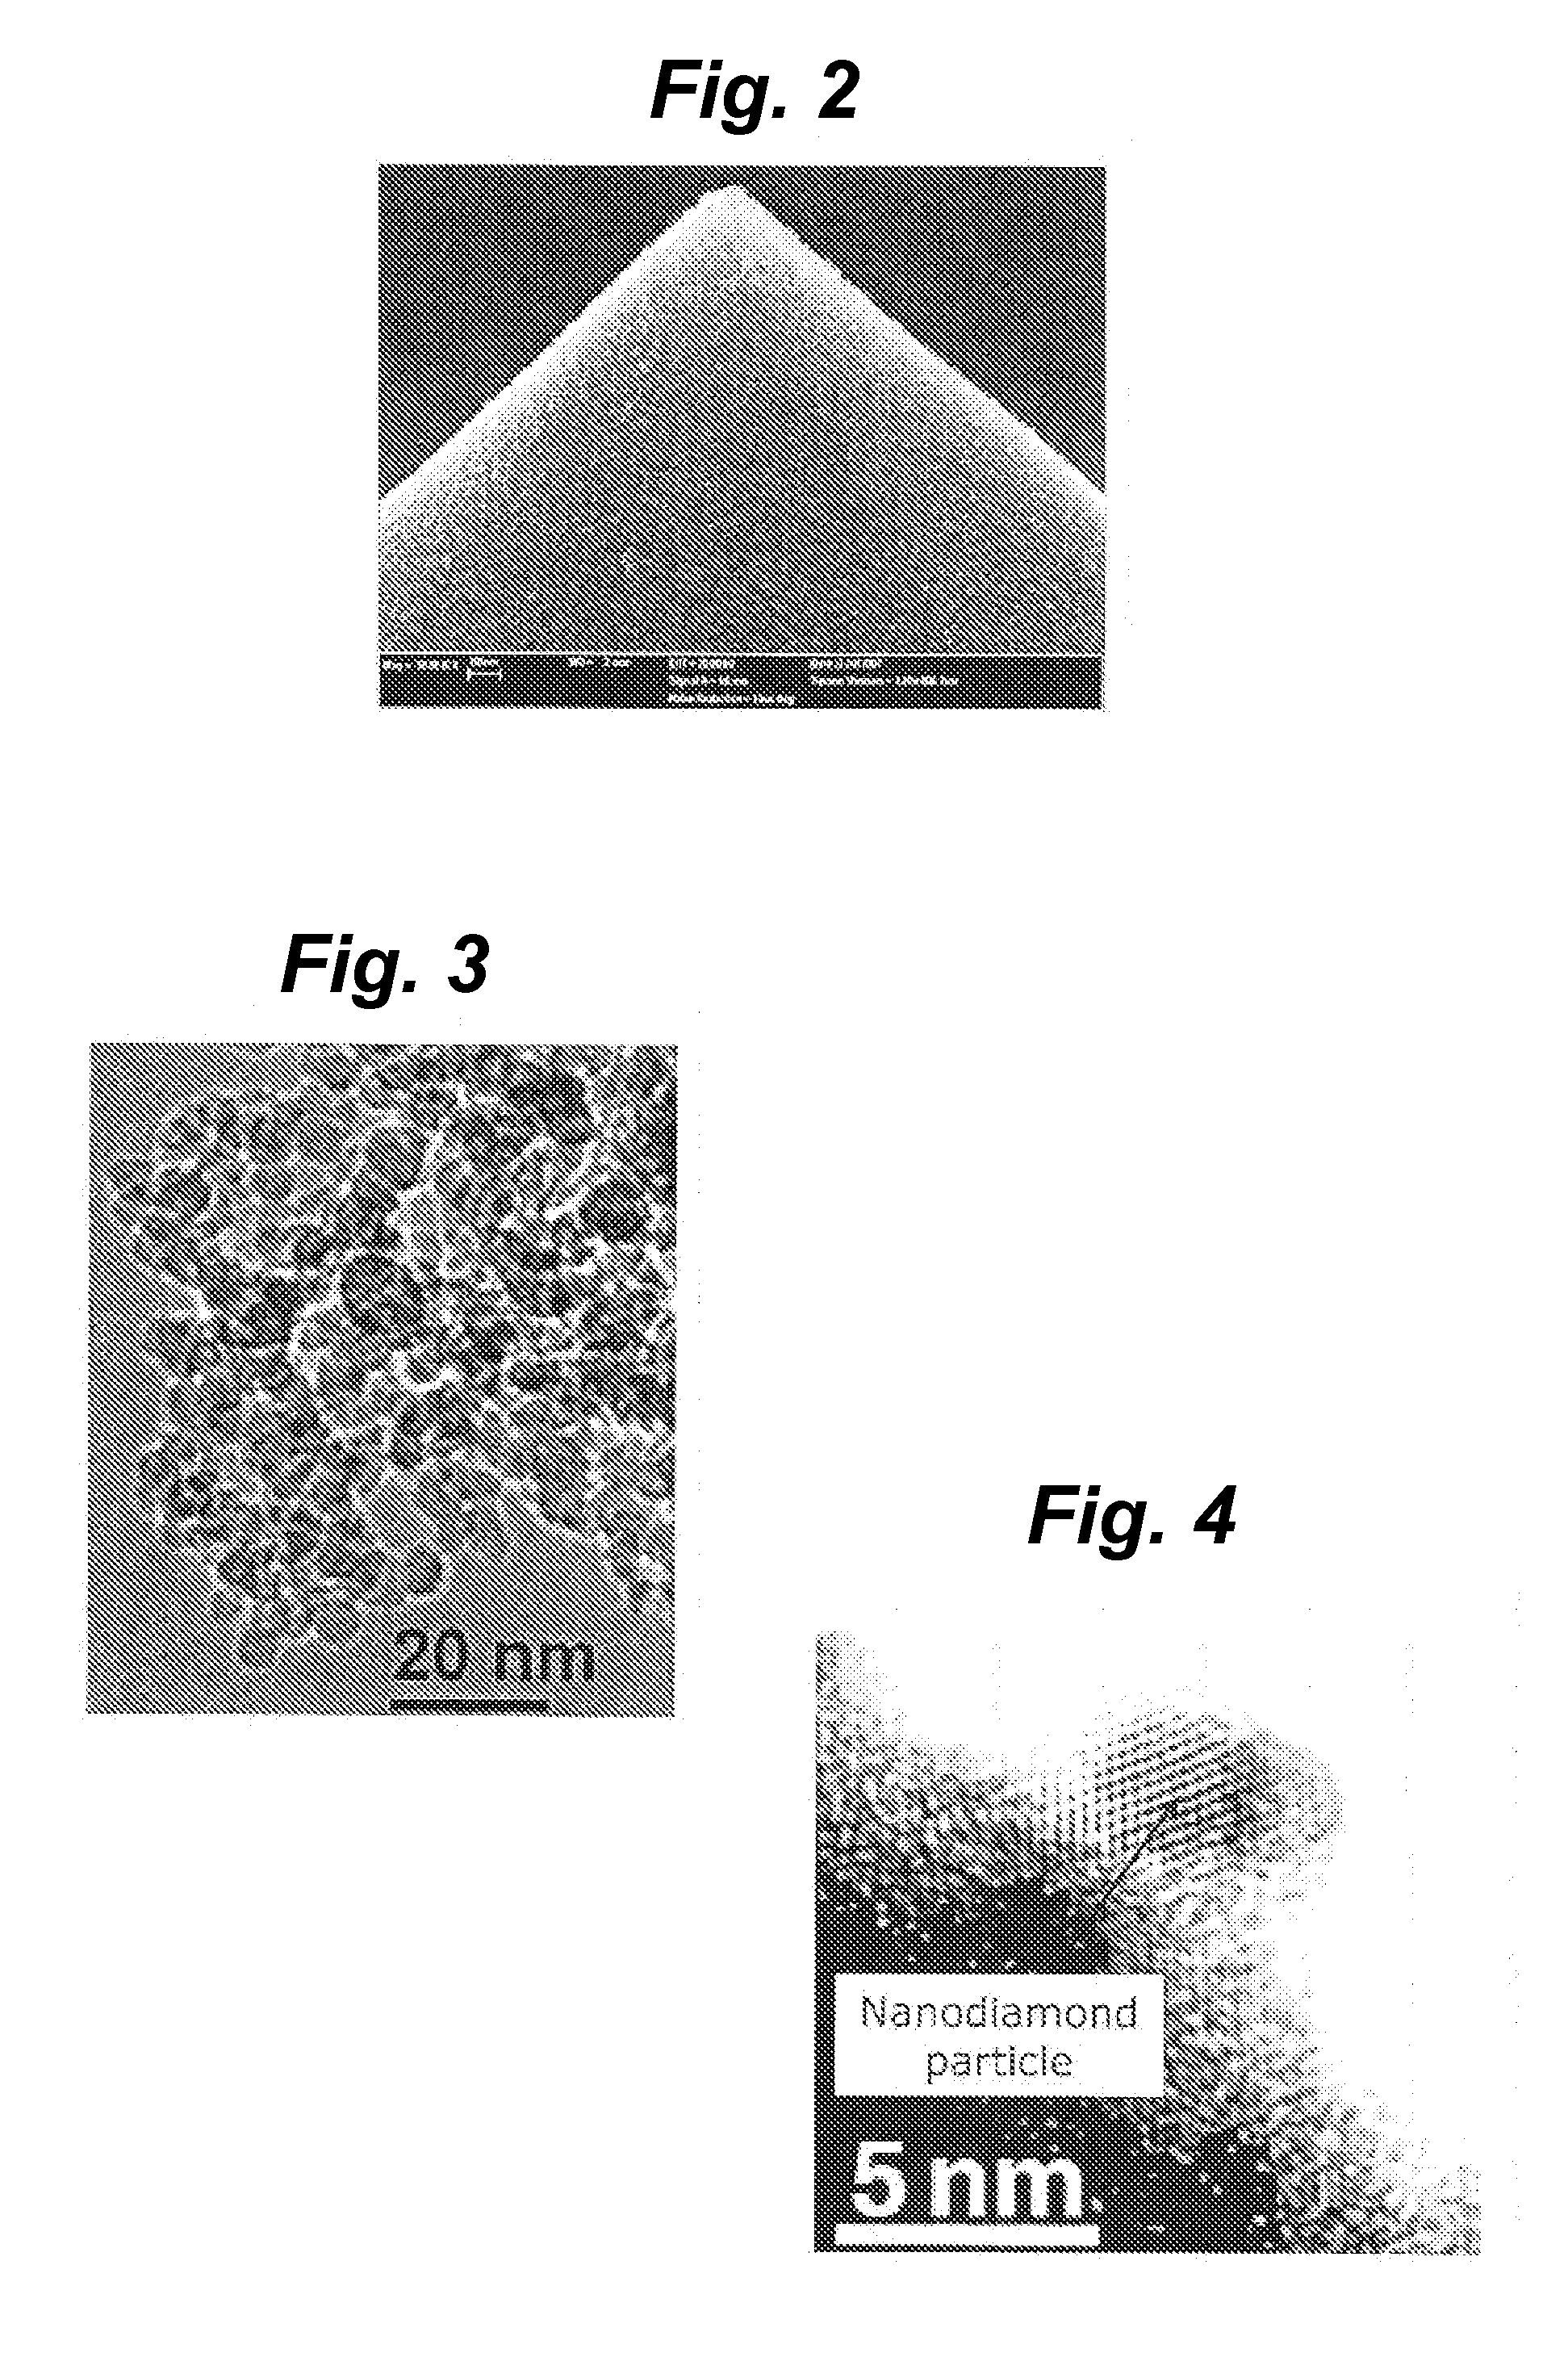 Method for producing nanocrystalline diamond coatings on gemstones and other substrates